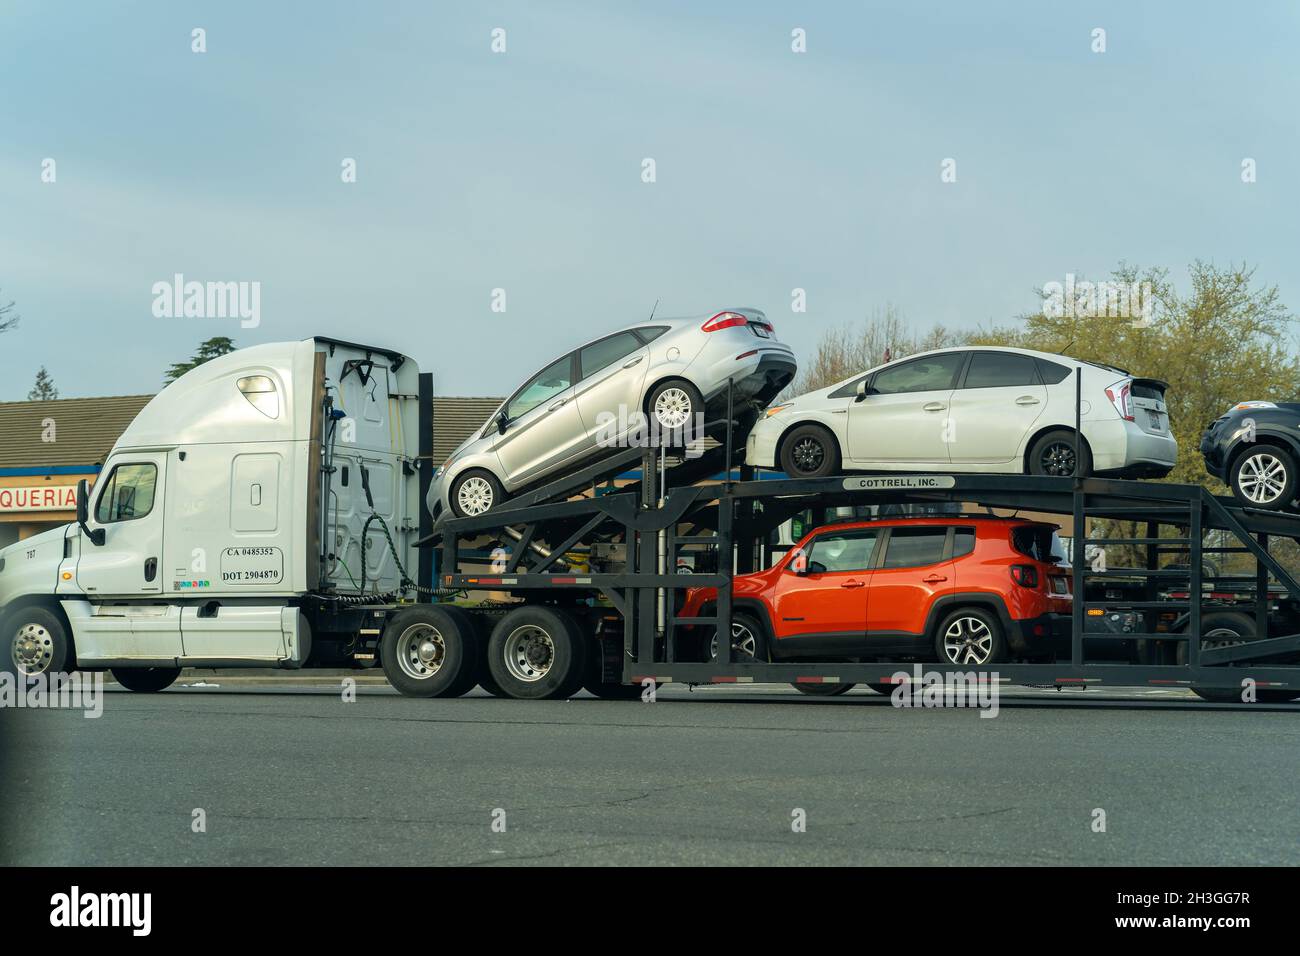 SACRAMENTO, UNITED STATES - Mar 17, 2021: The cars being transported by a car hauler during the daytime Stock Photo